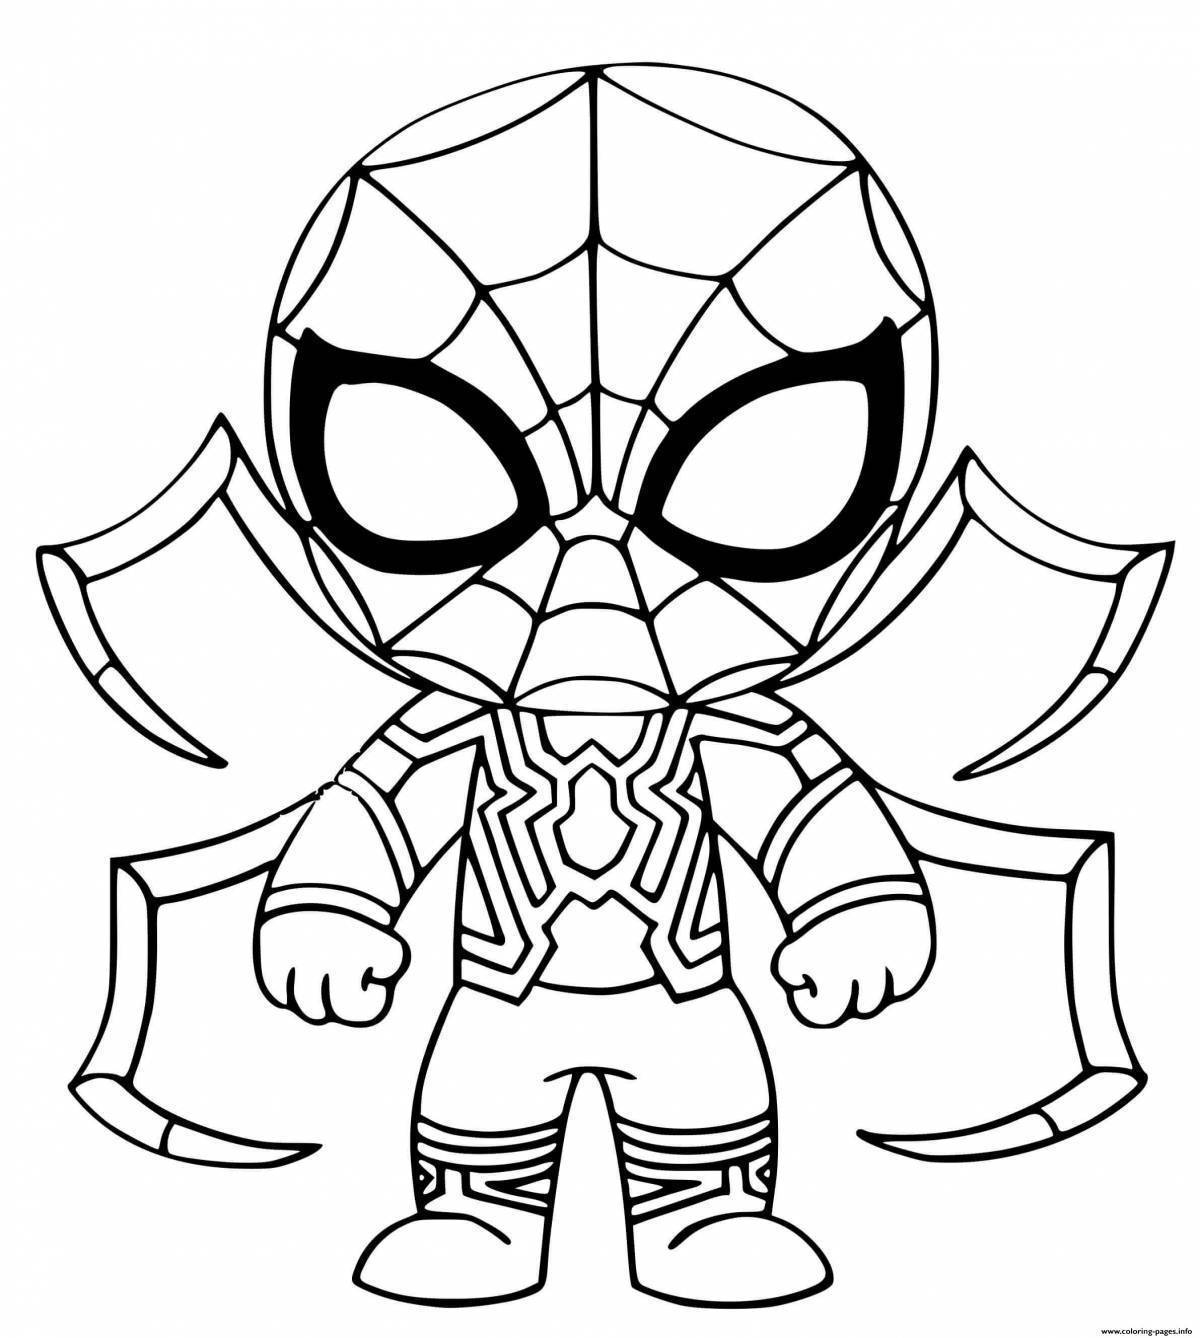 Charming iron spiderman coloring book